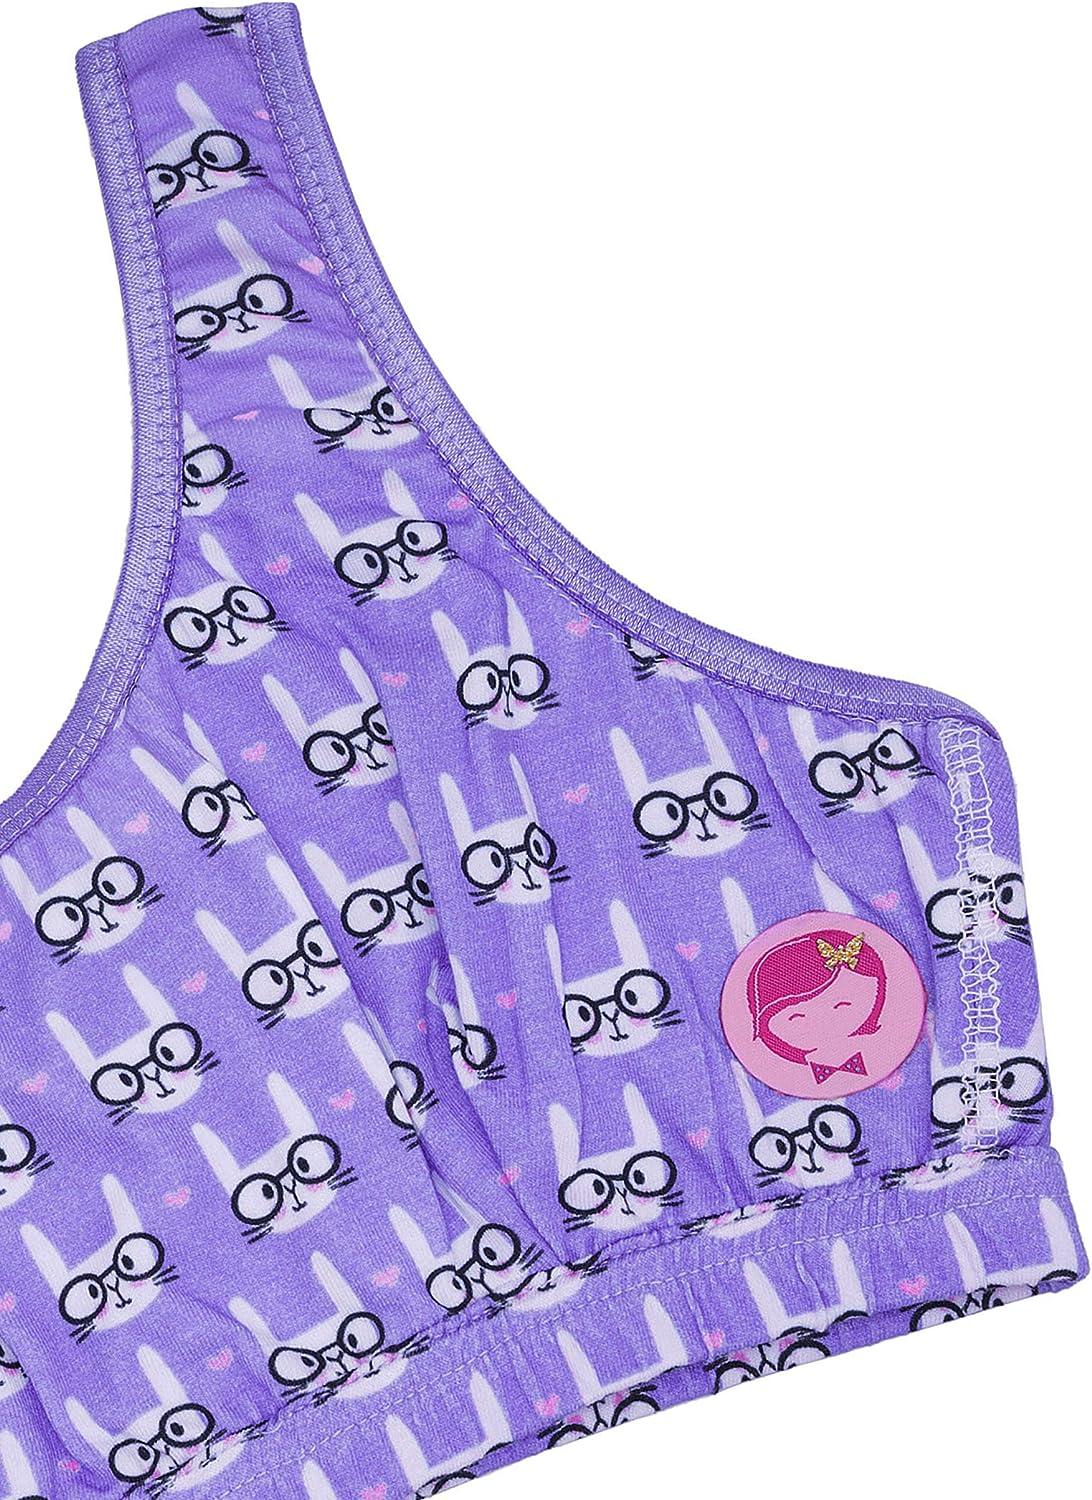 D'chica girls beginner bras are made in sports bras for beginner shapes,  making it the perfect & versatile choice of training…